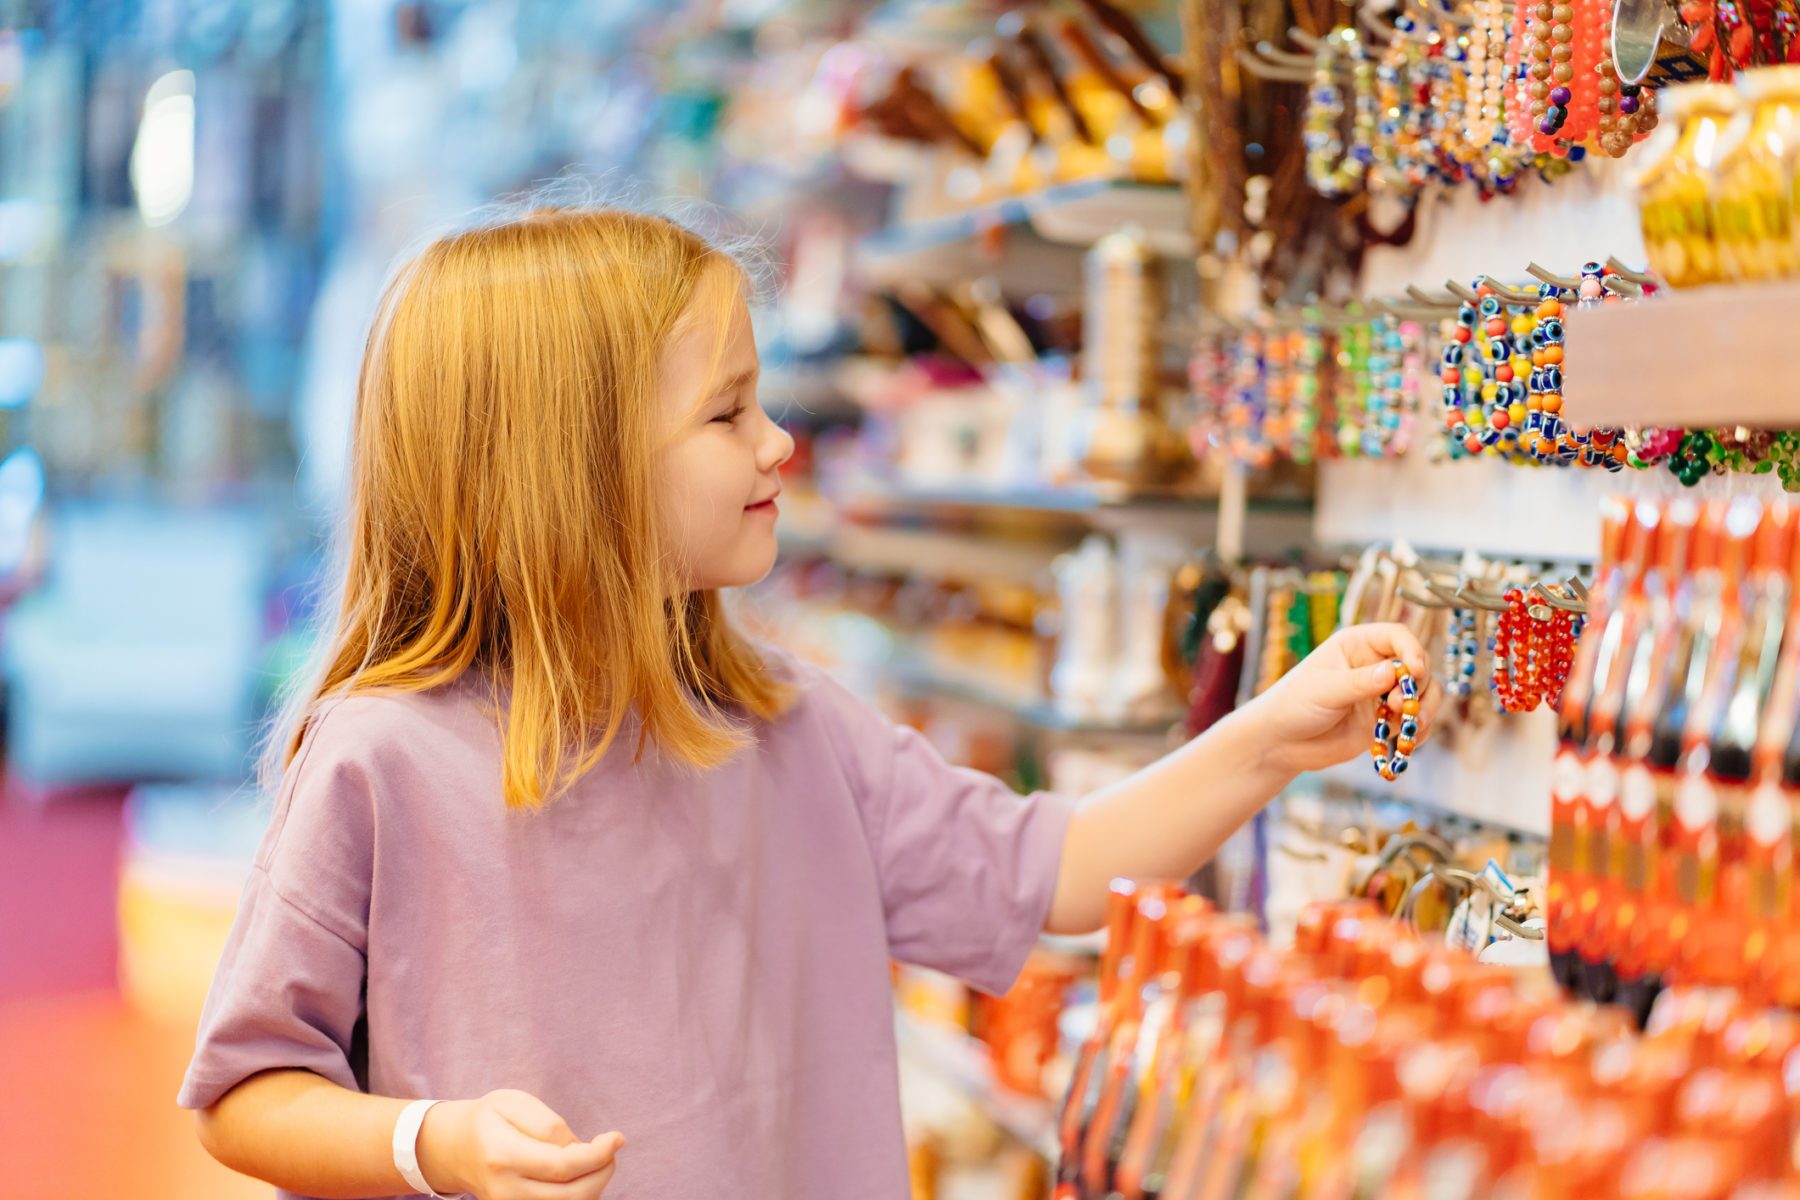 a funny little girl looks with interest at jewelry and souvenirs in the store.